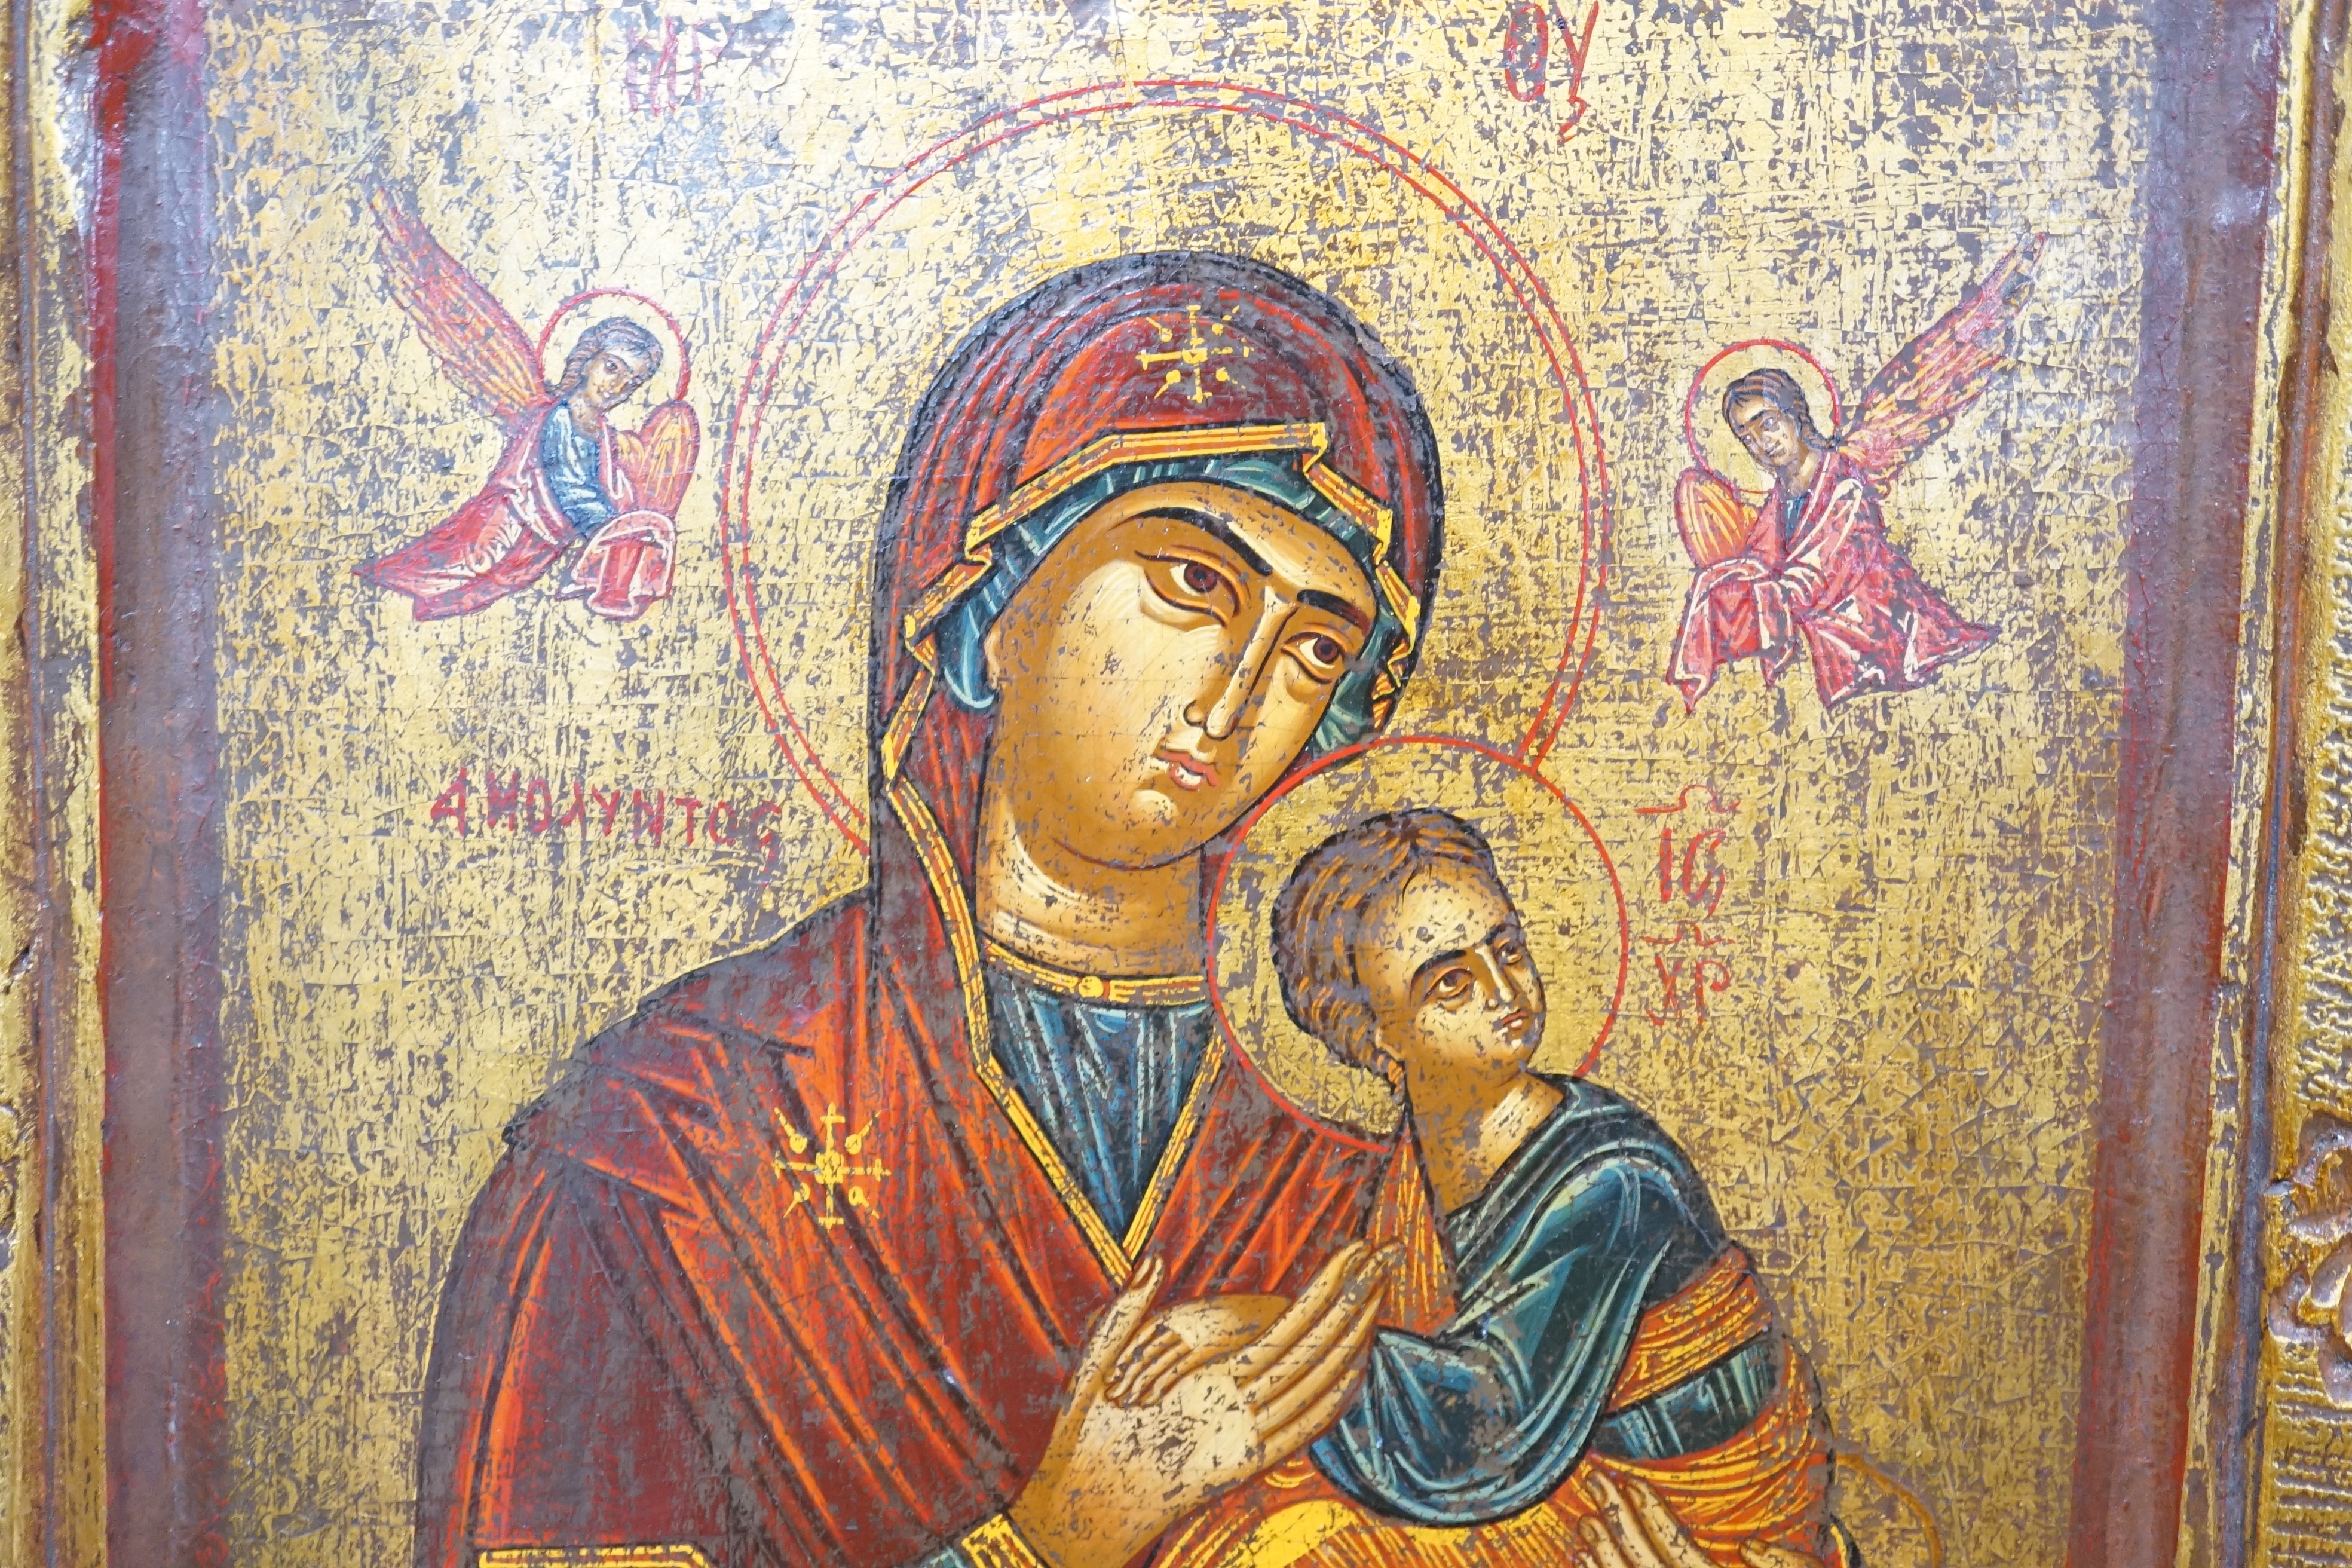 Eastern European School, tempera on panel, Icon of the Virgin and child, 36 x 28cm